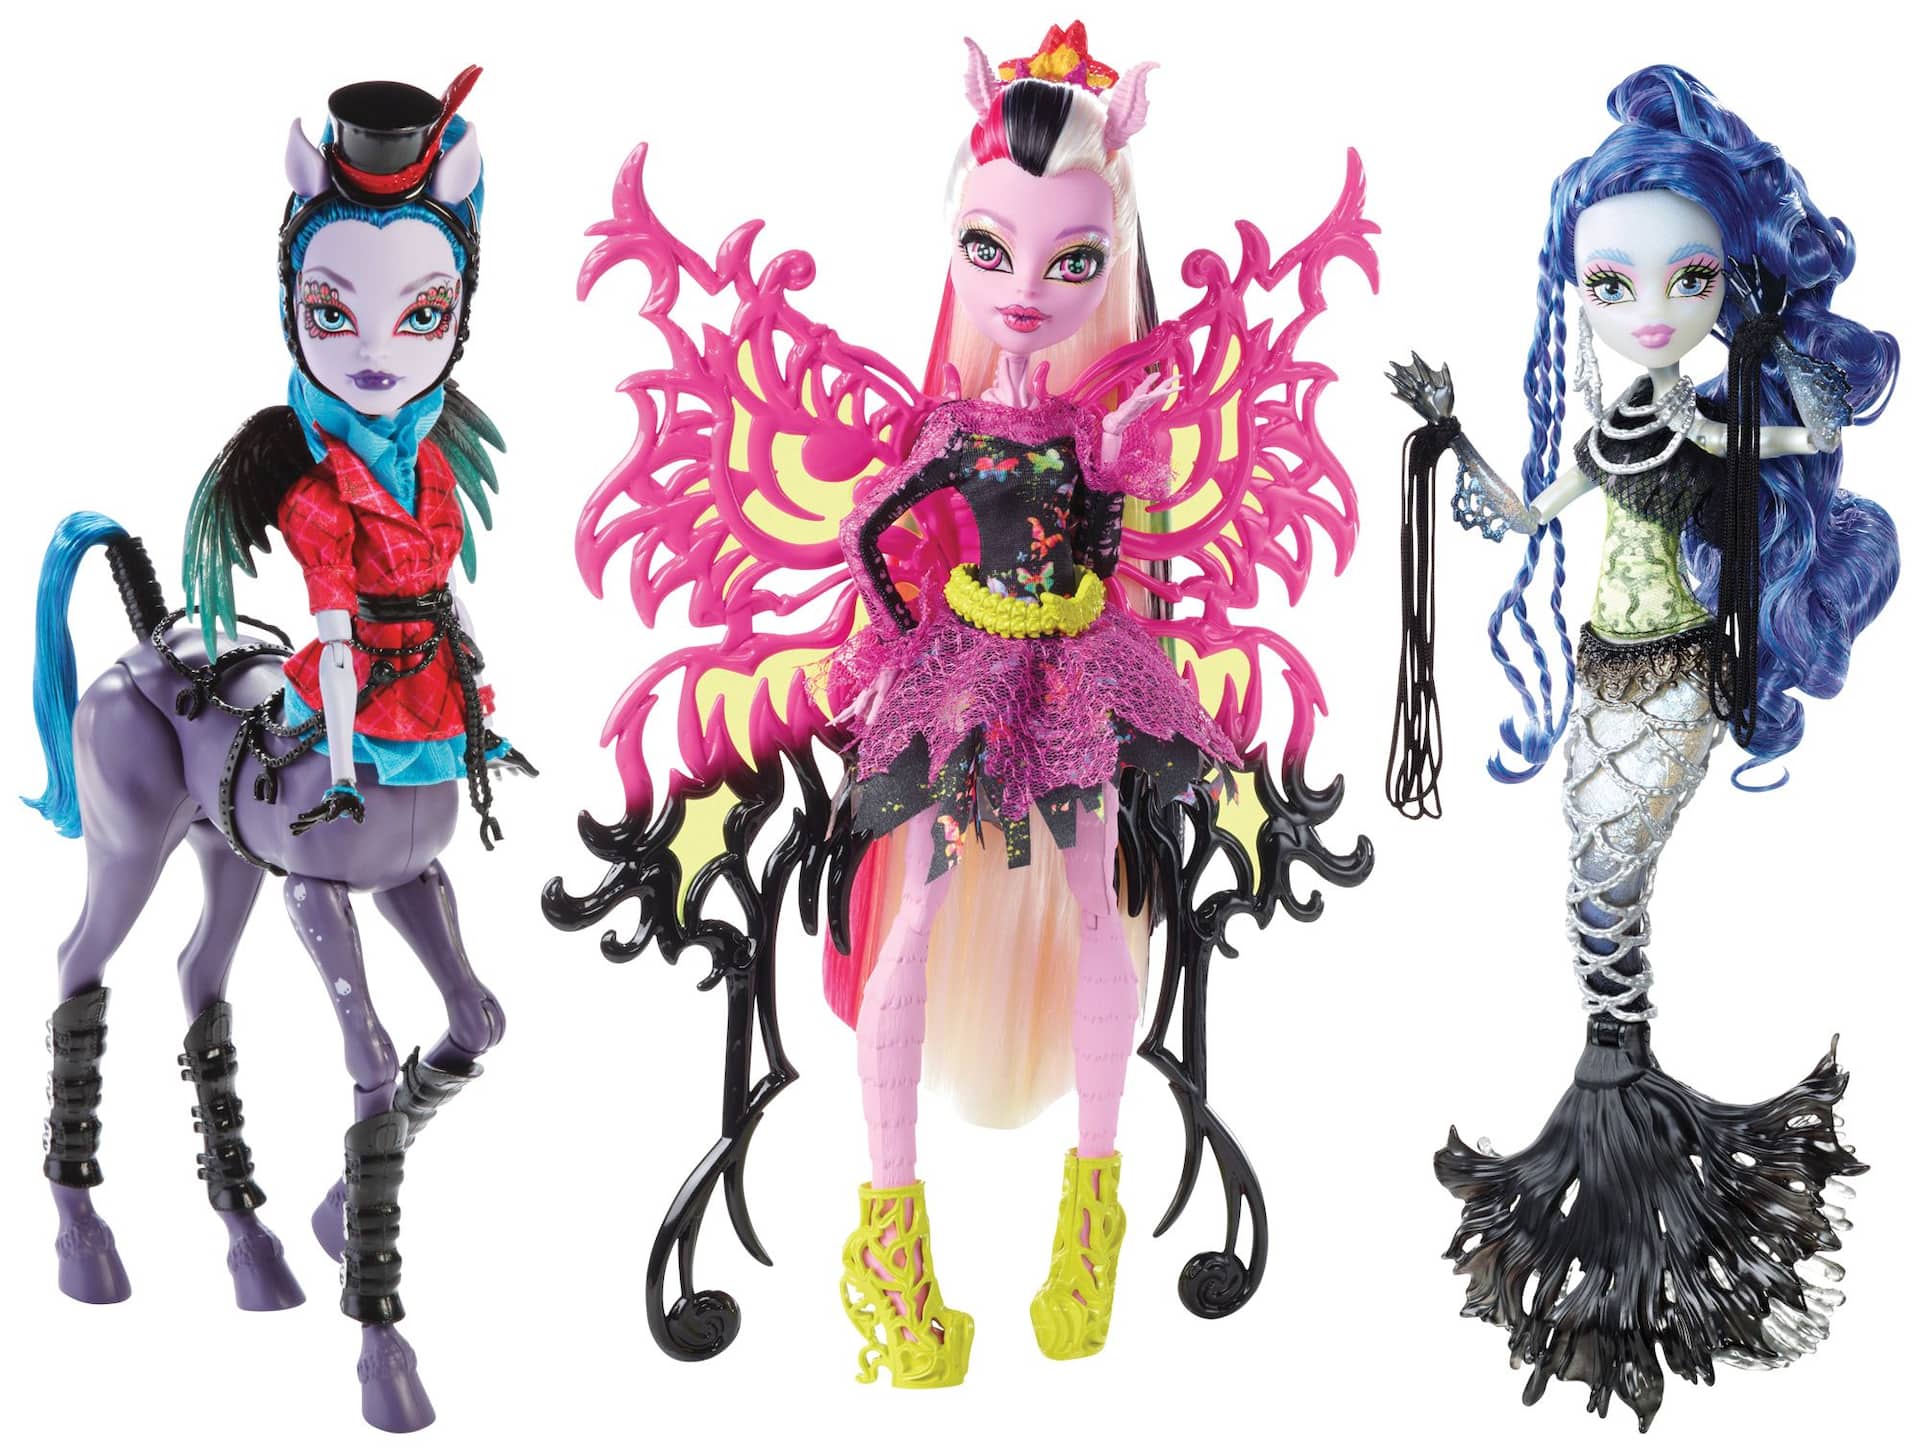 https://media-www.canadiantire.ca/product/seasonal-gardening/toys/toys-games/0507135/monster-high-entertainment-b4156e9f-d6c1-452e-b6f0-a10936fb73cc-jpgrendition.jpg